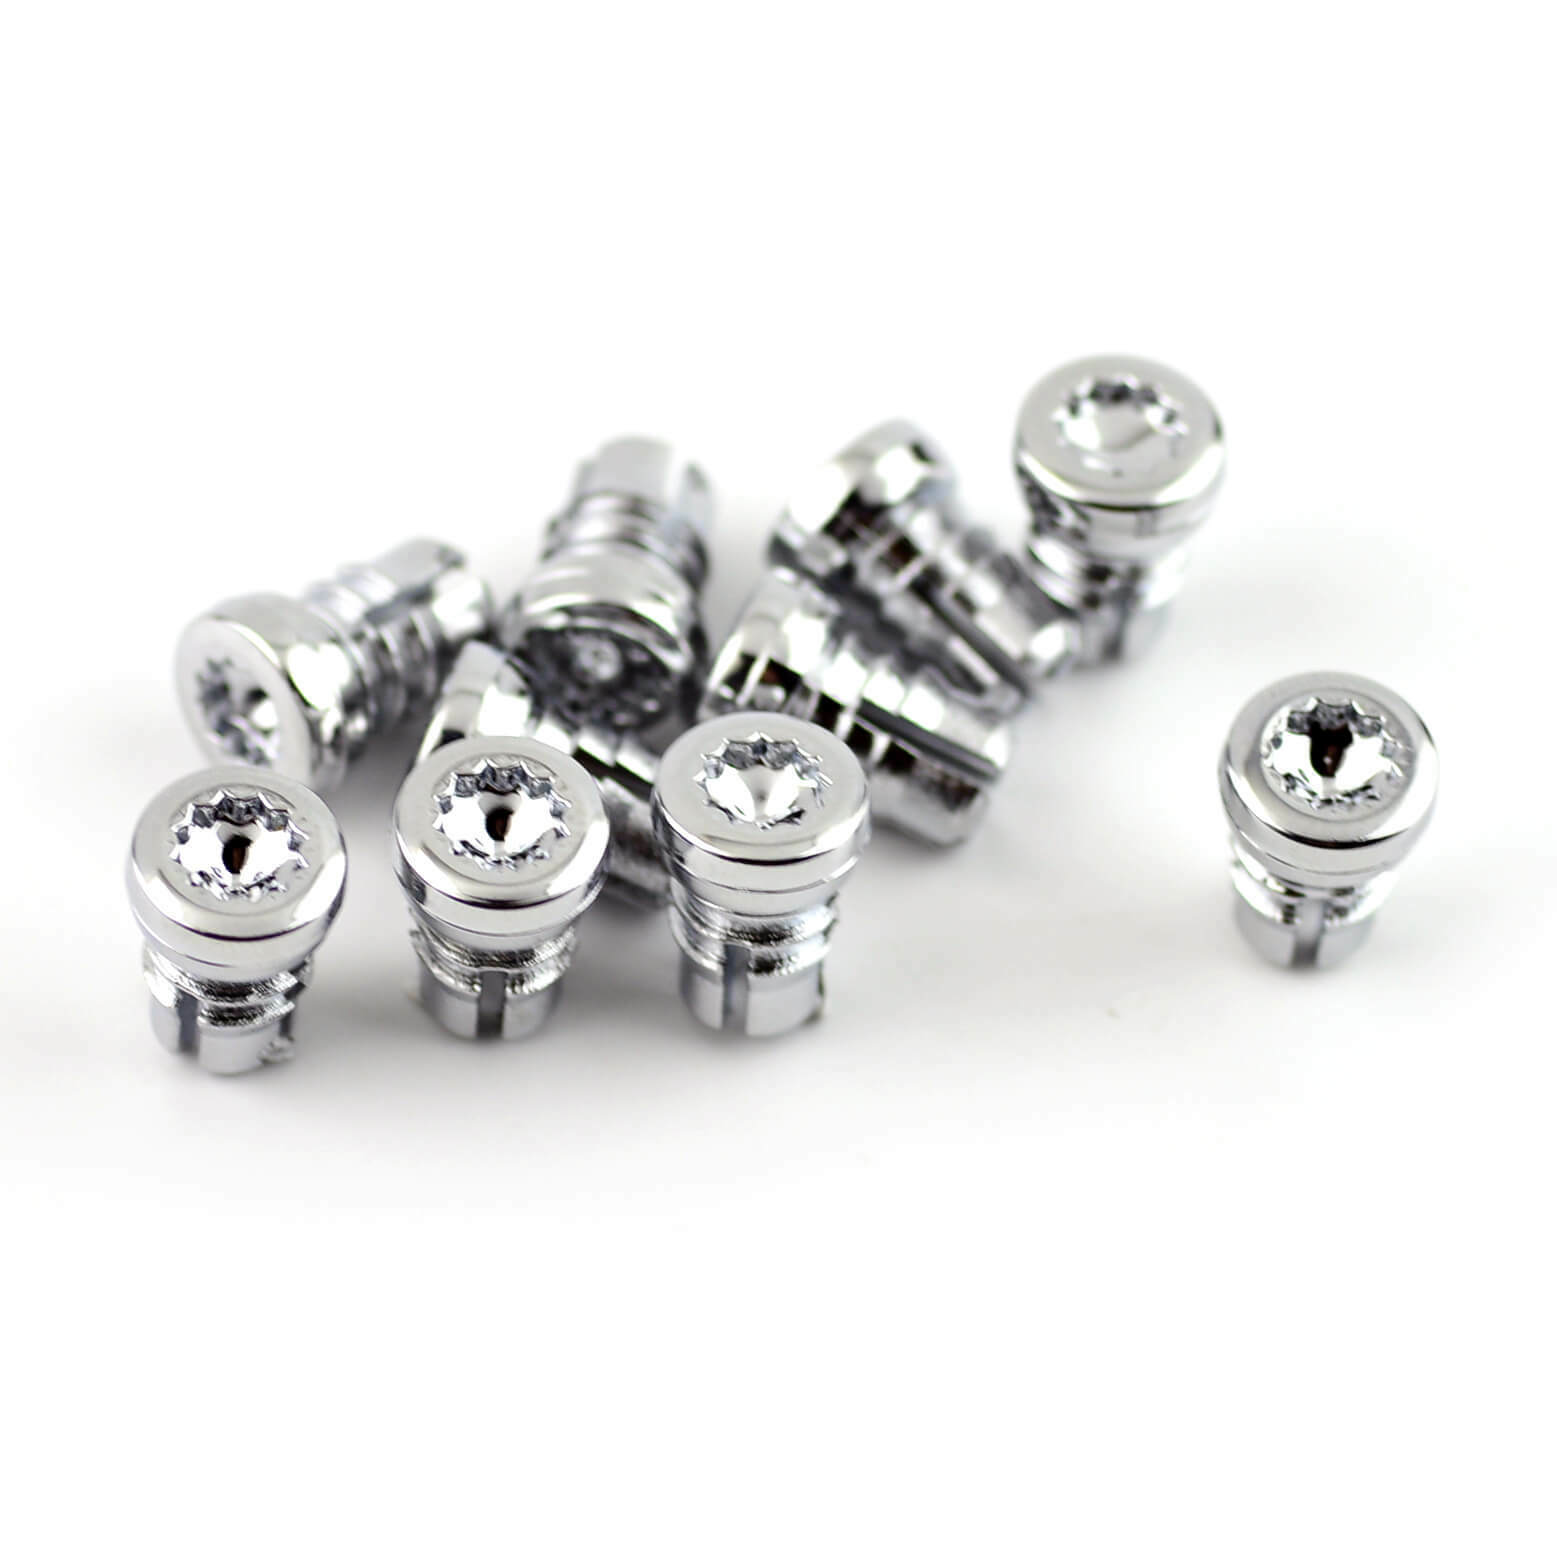 100pcs 10mm Wheel Rivets Nuts Rim Lip Replacement Decoration Nails For 7.9mm Hol